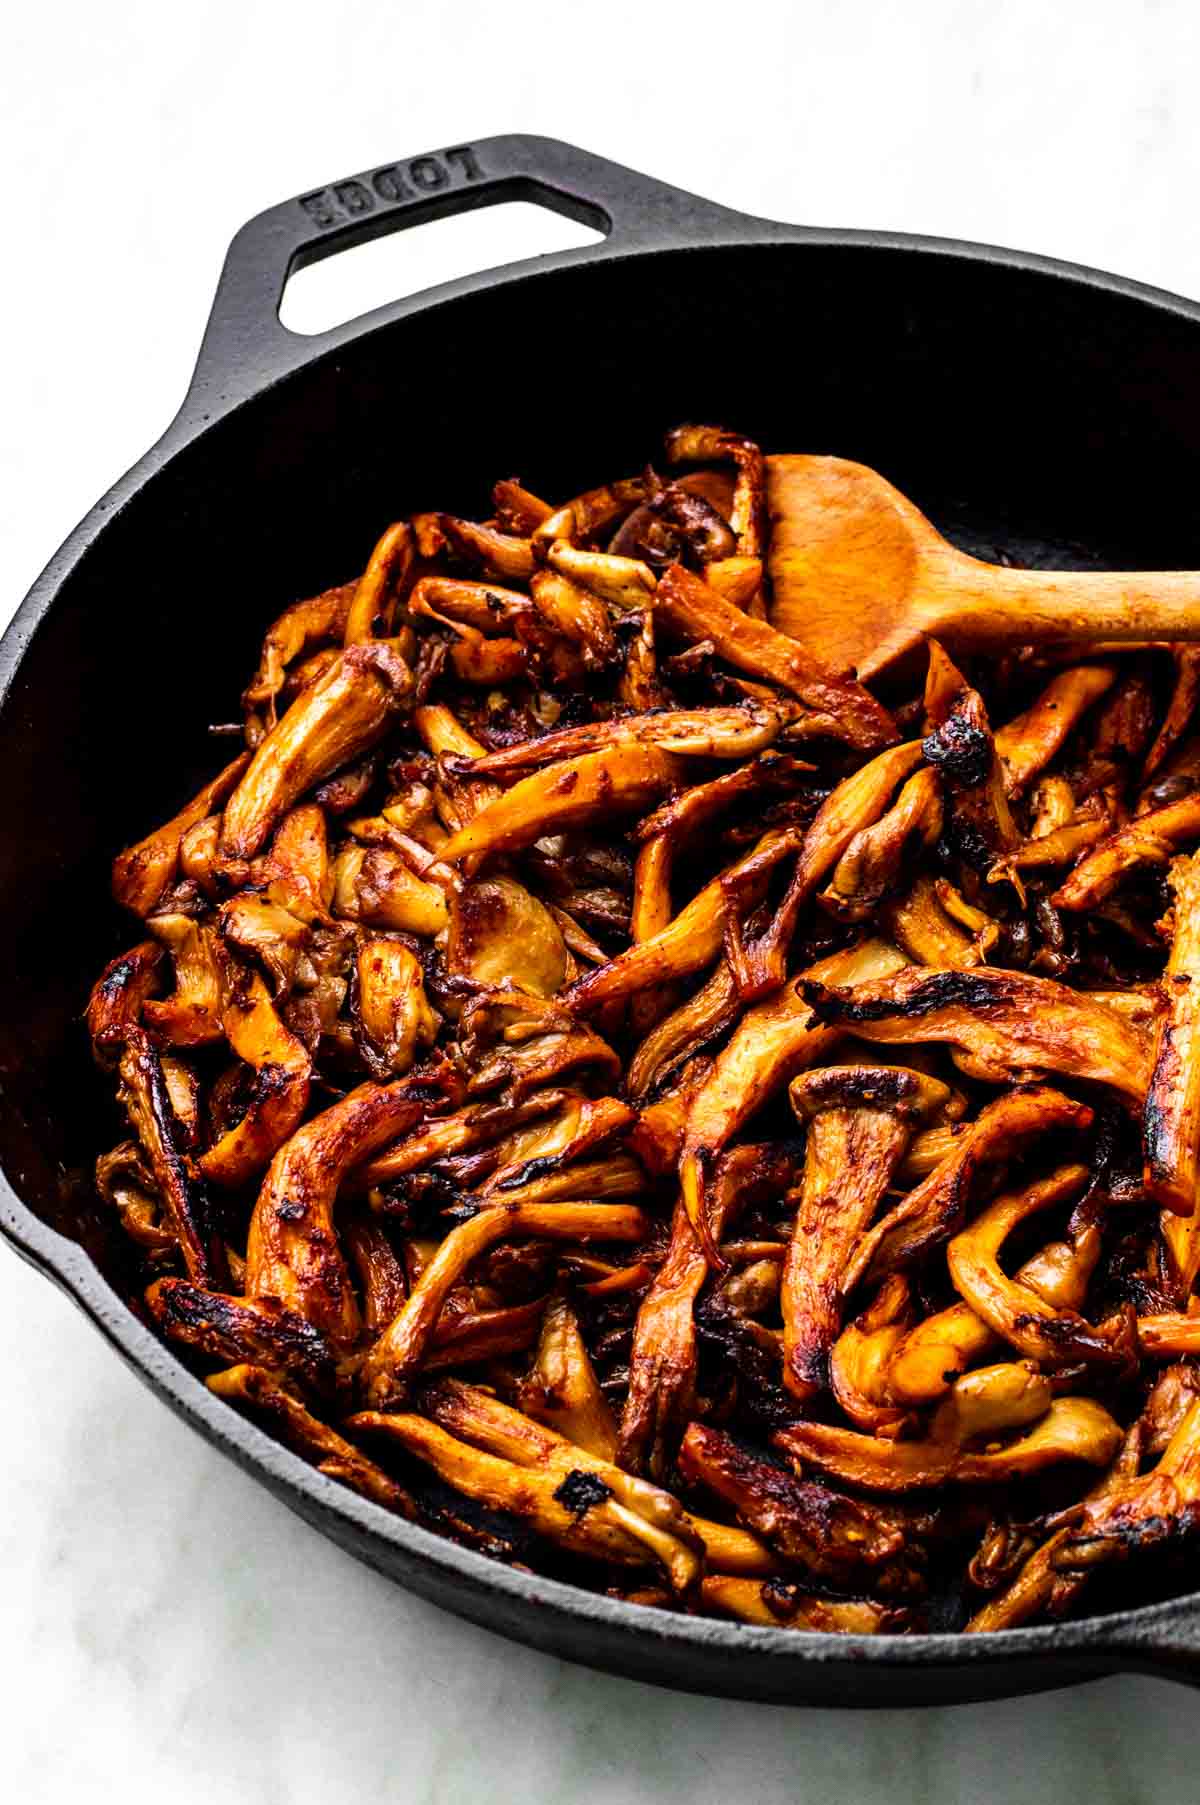 The caramelized mushrooms in a skillet.